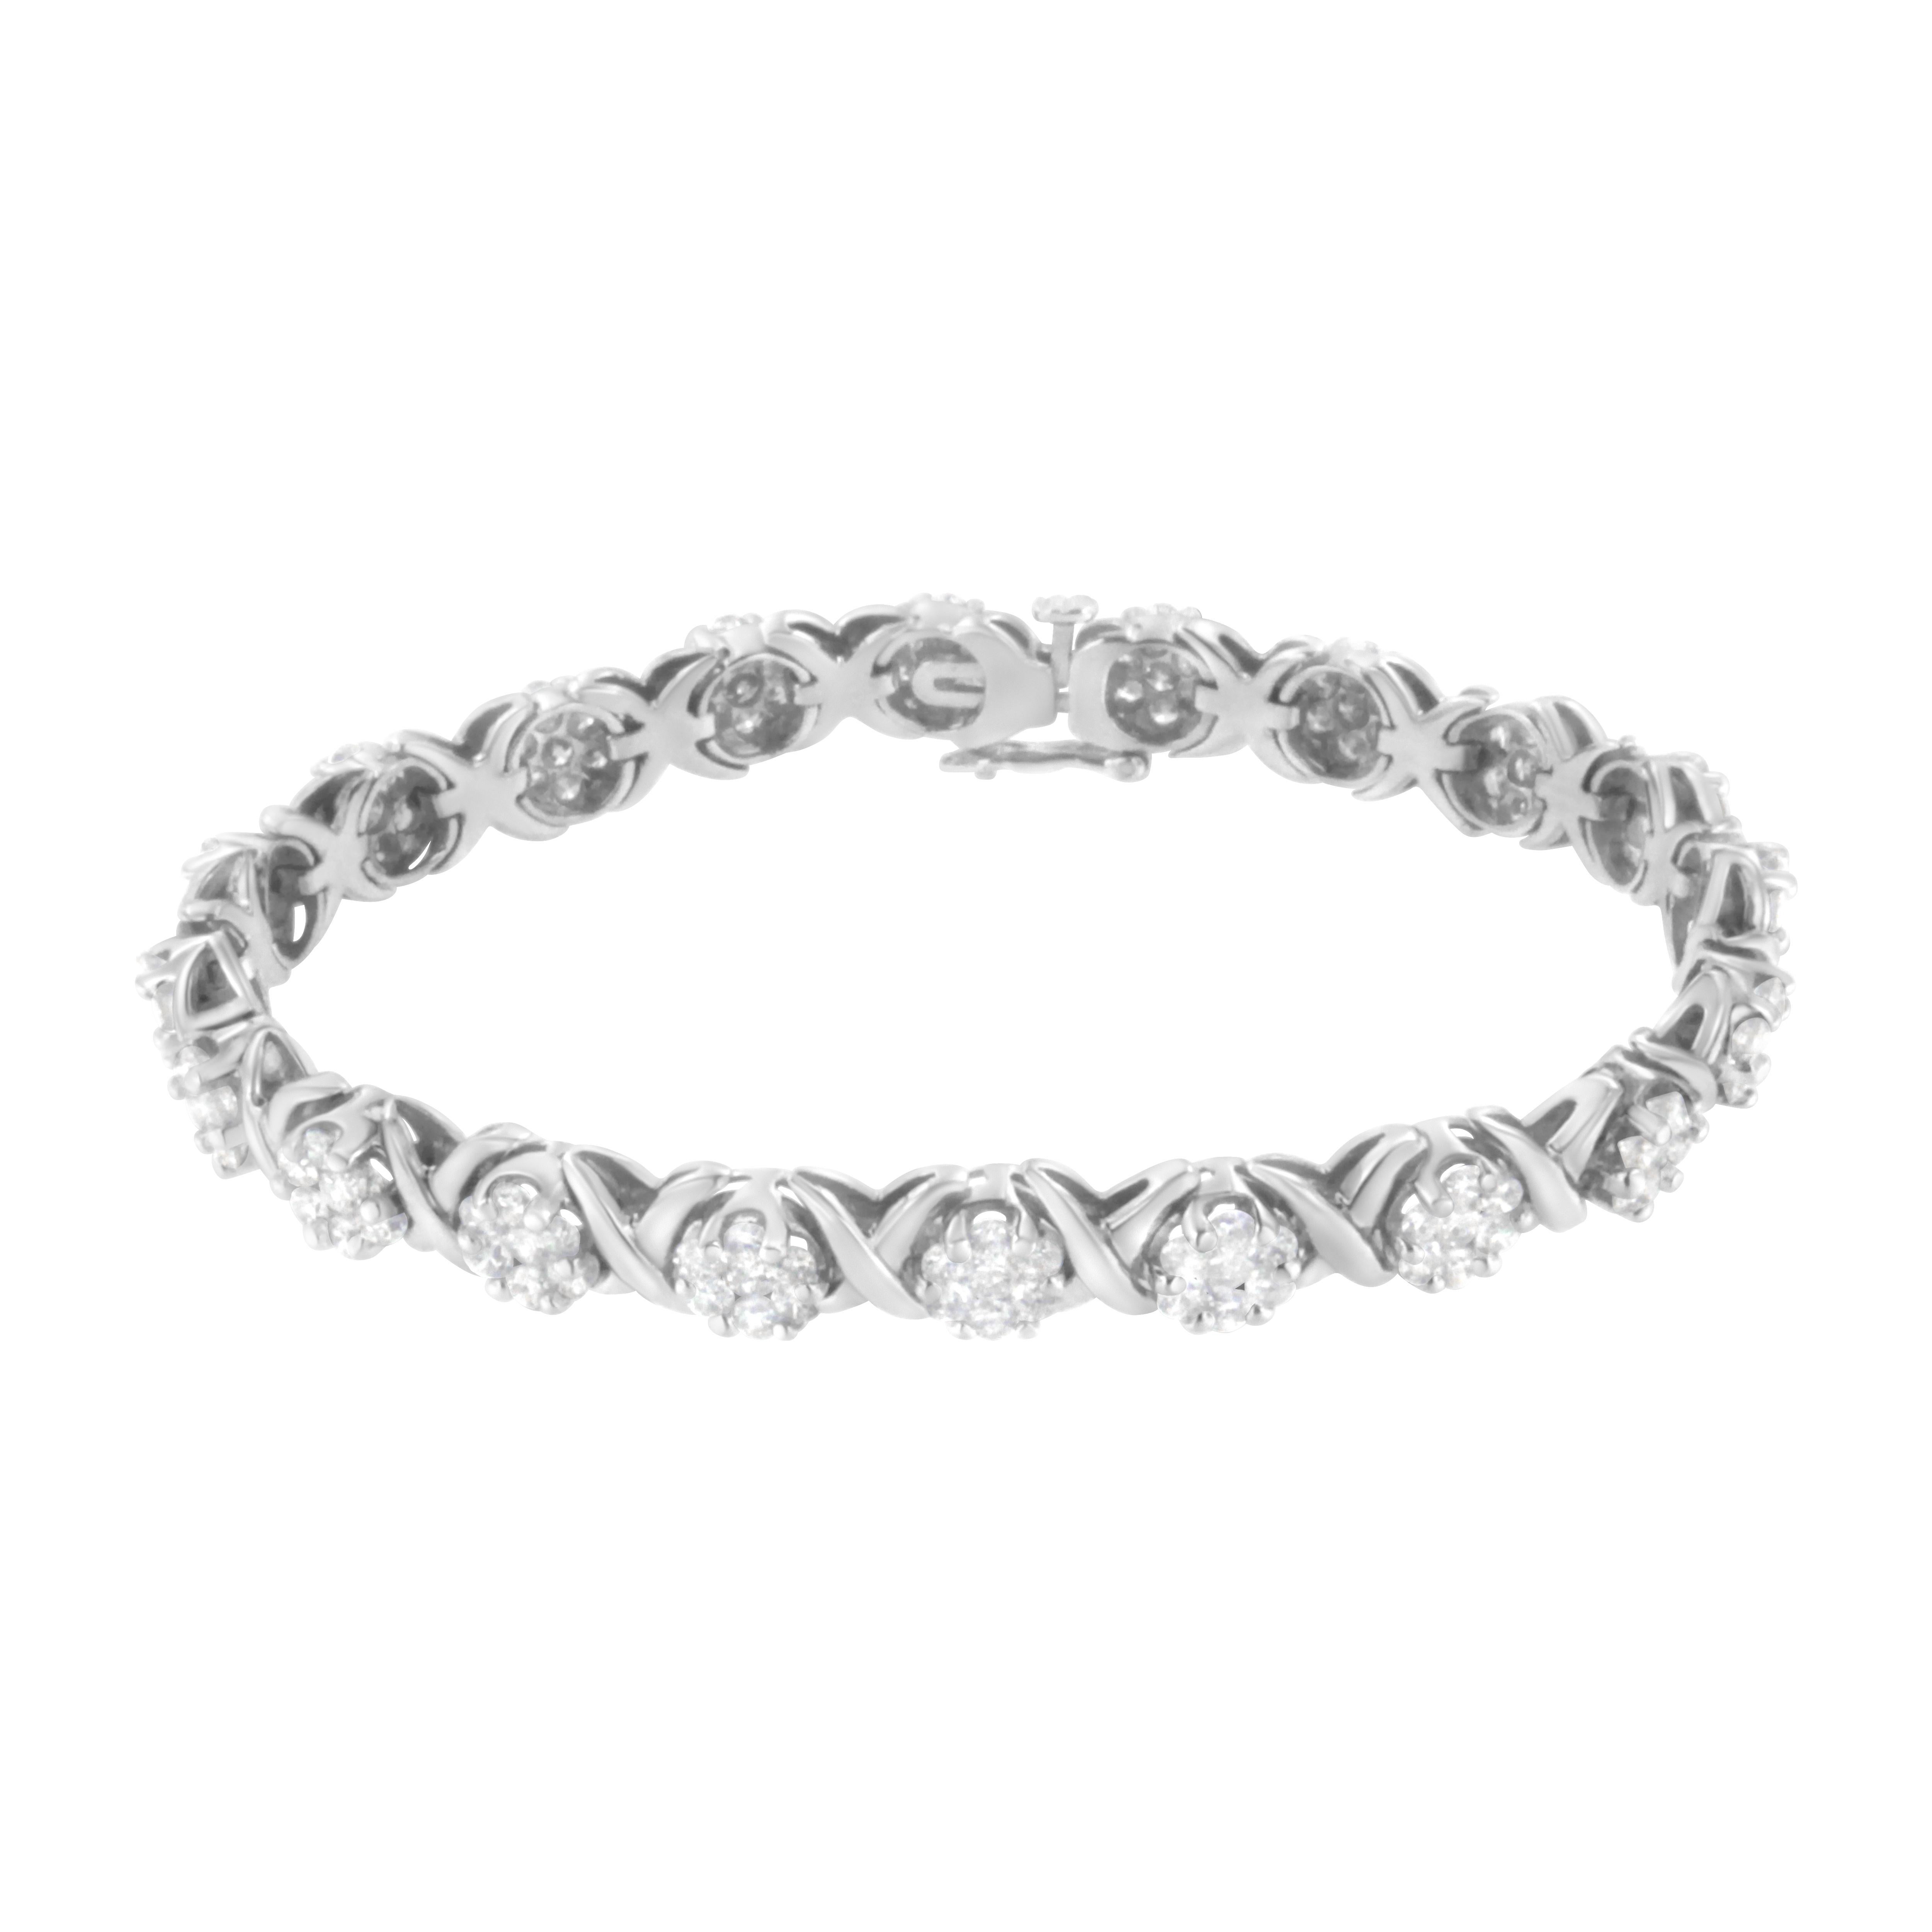 Elegant and timeless, this gorgeous 14K white gold tennis bracelet features alternating links with round clusters of brilliant cut diamonds and X shaped links. The tennis bracelet closes with a box clasp with foldover figure eight safety clip for